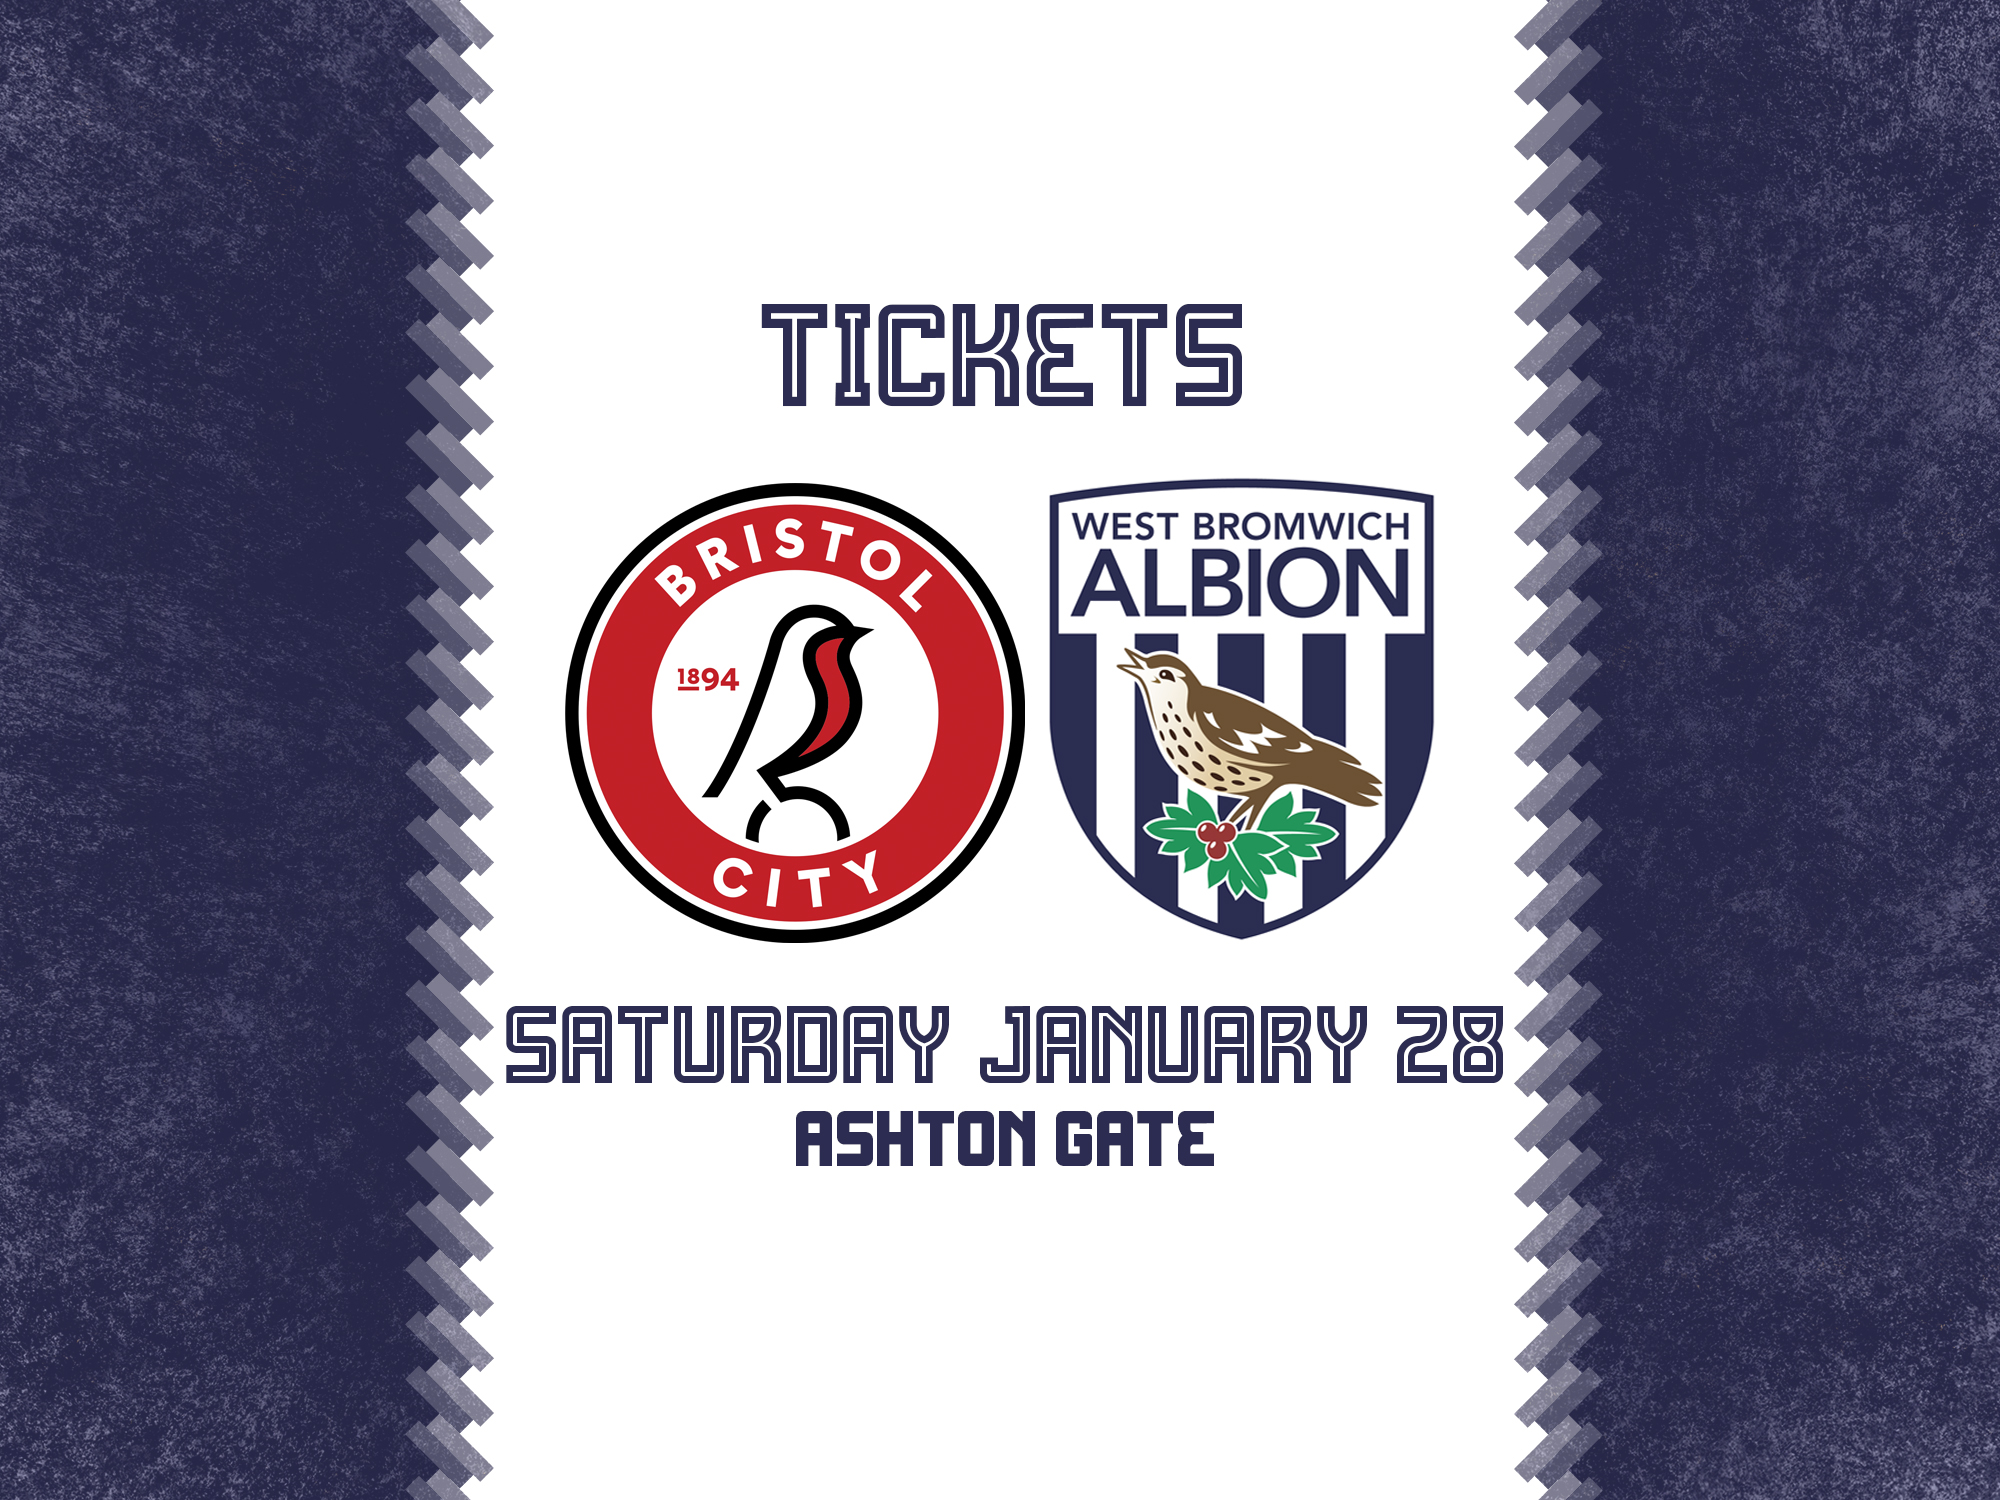 A ticket graphic for Albion's FA Cup game against Bristol City